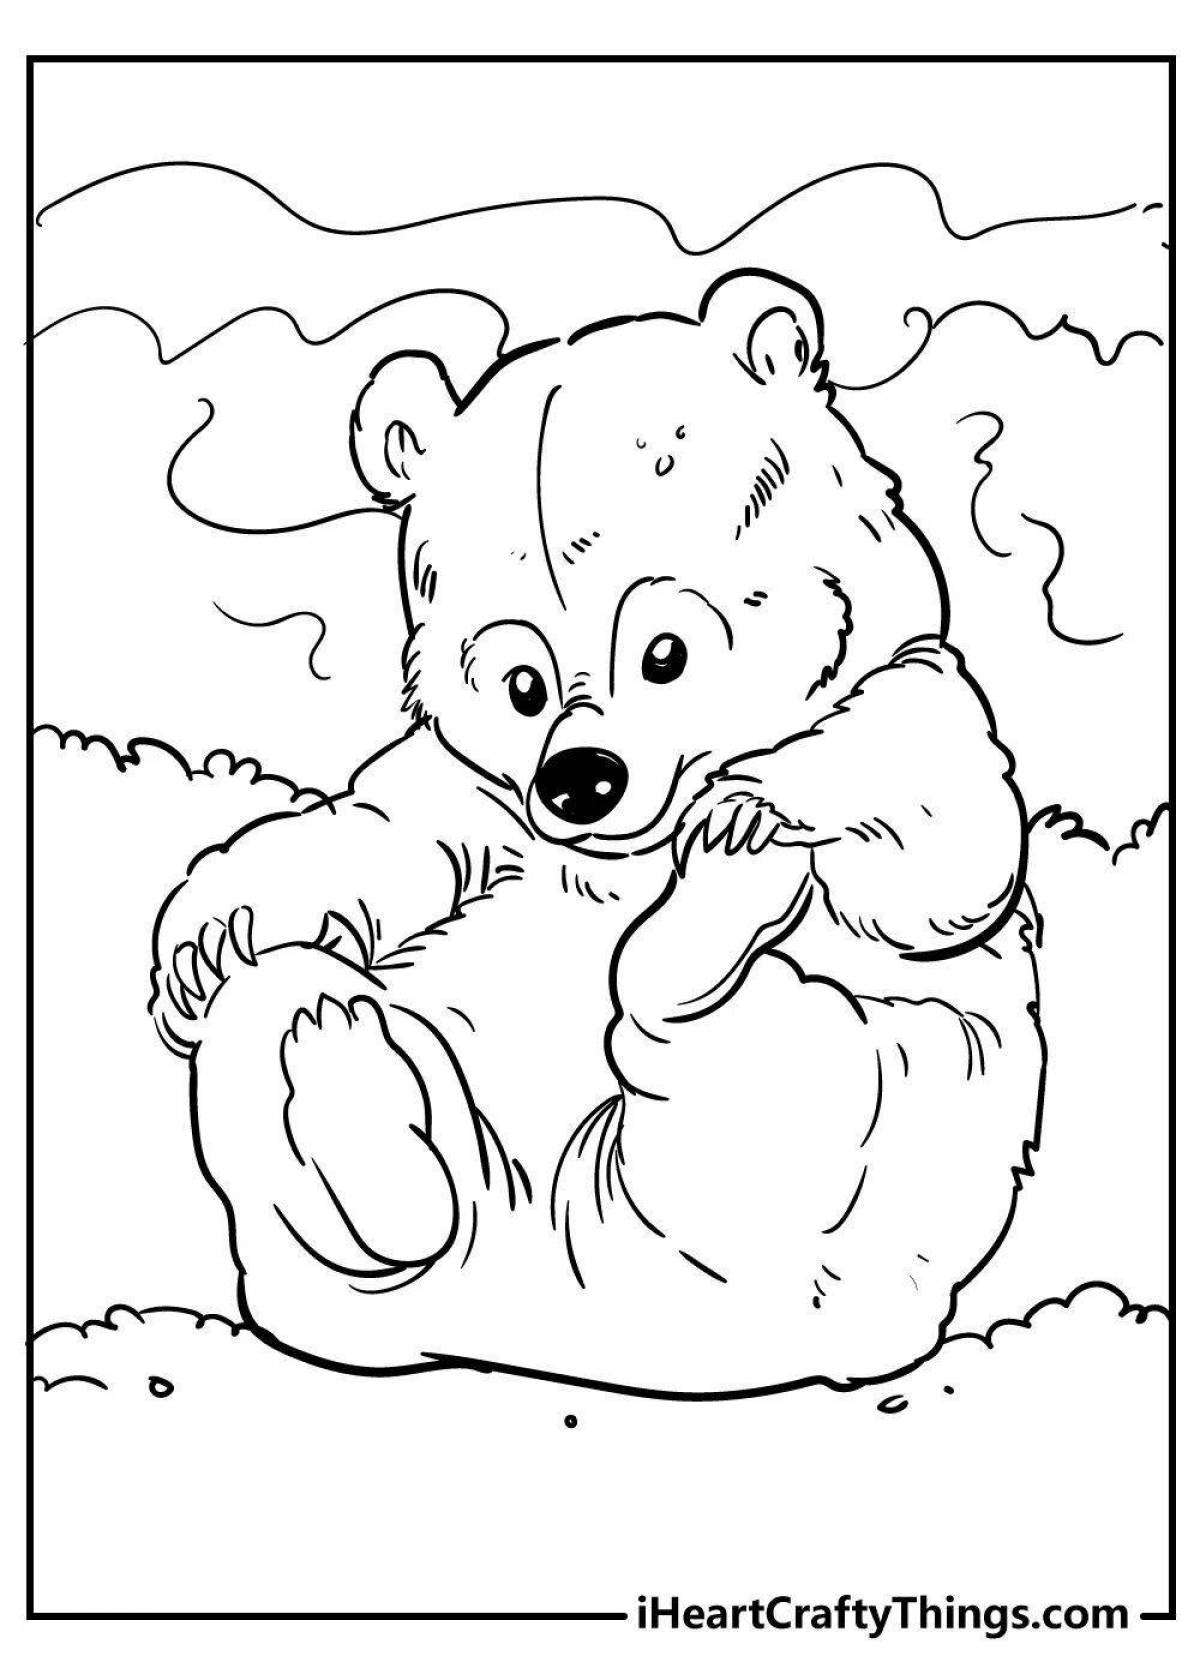 Live coloring bear for children 5-6 years old